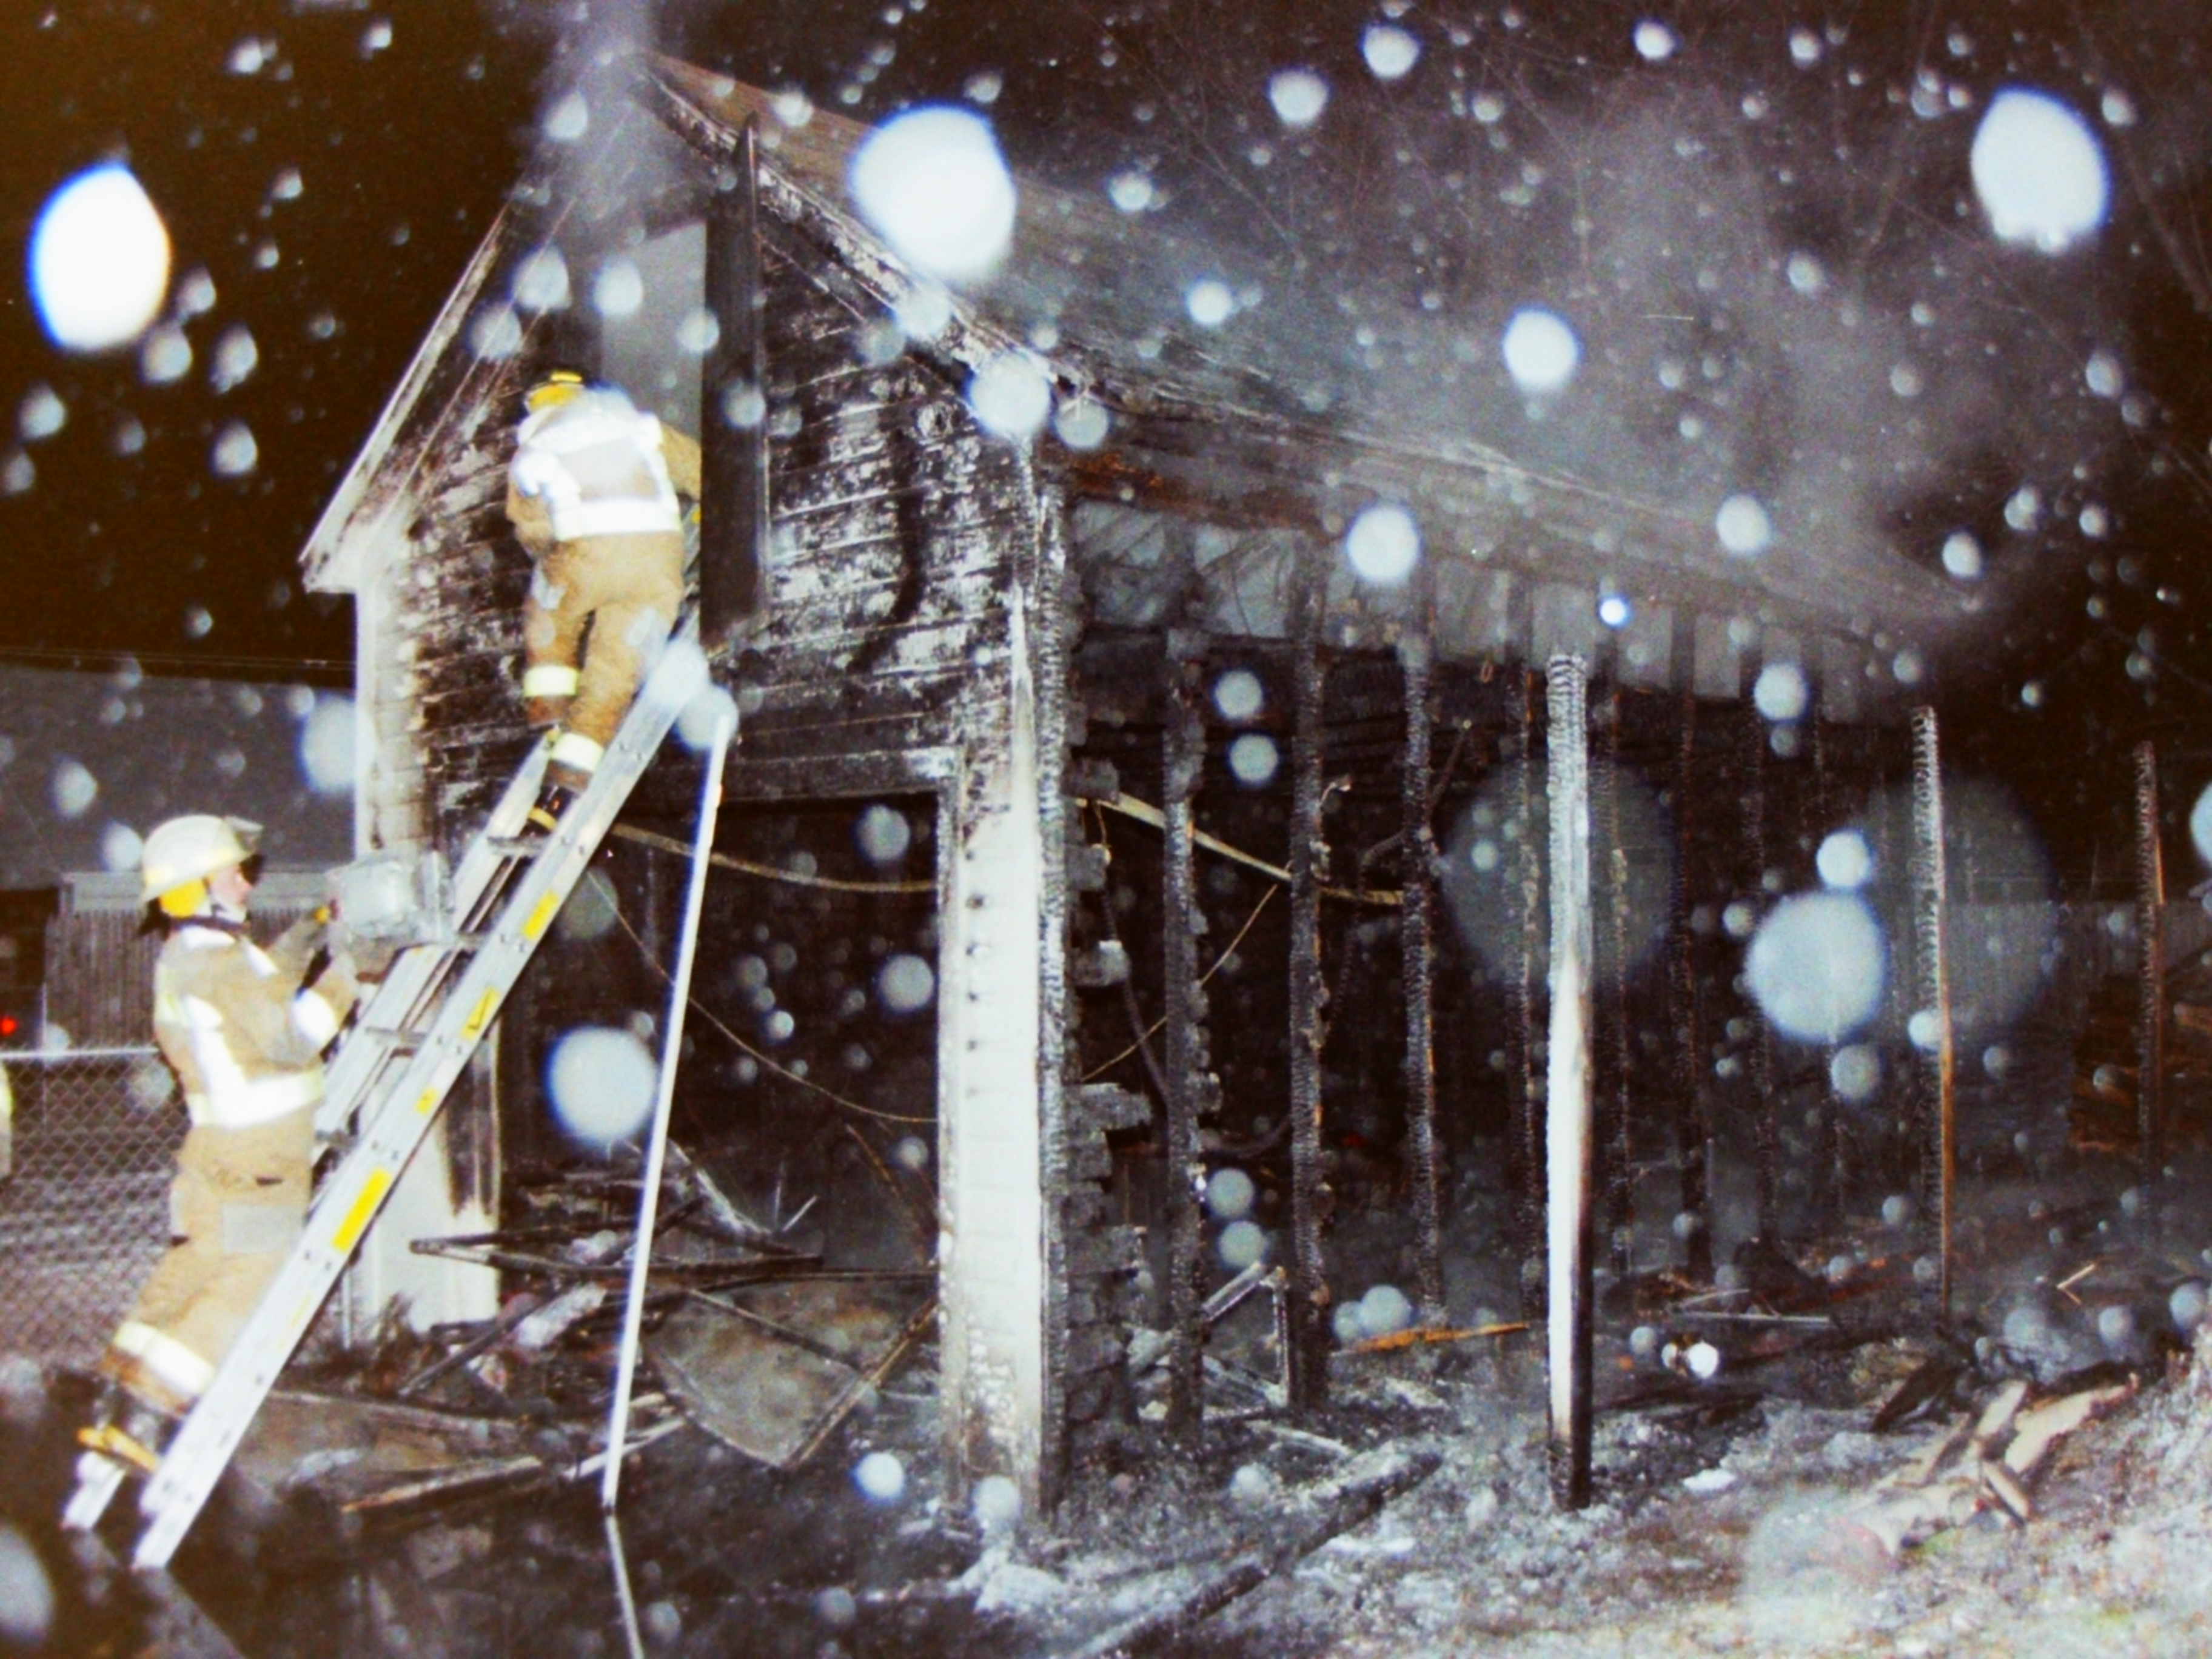 01-20-92  Other - Endwell Fire